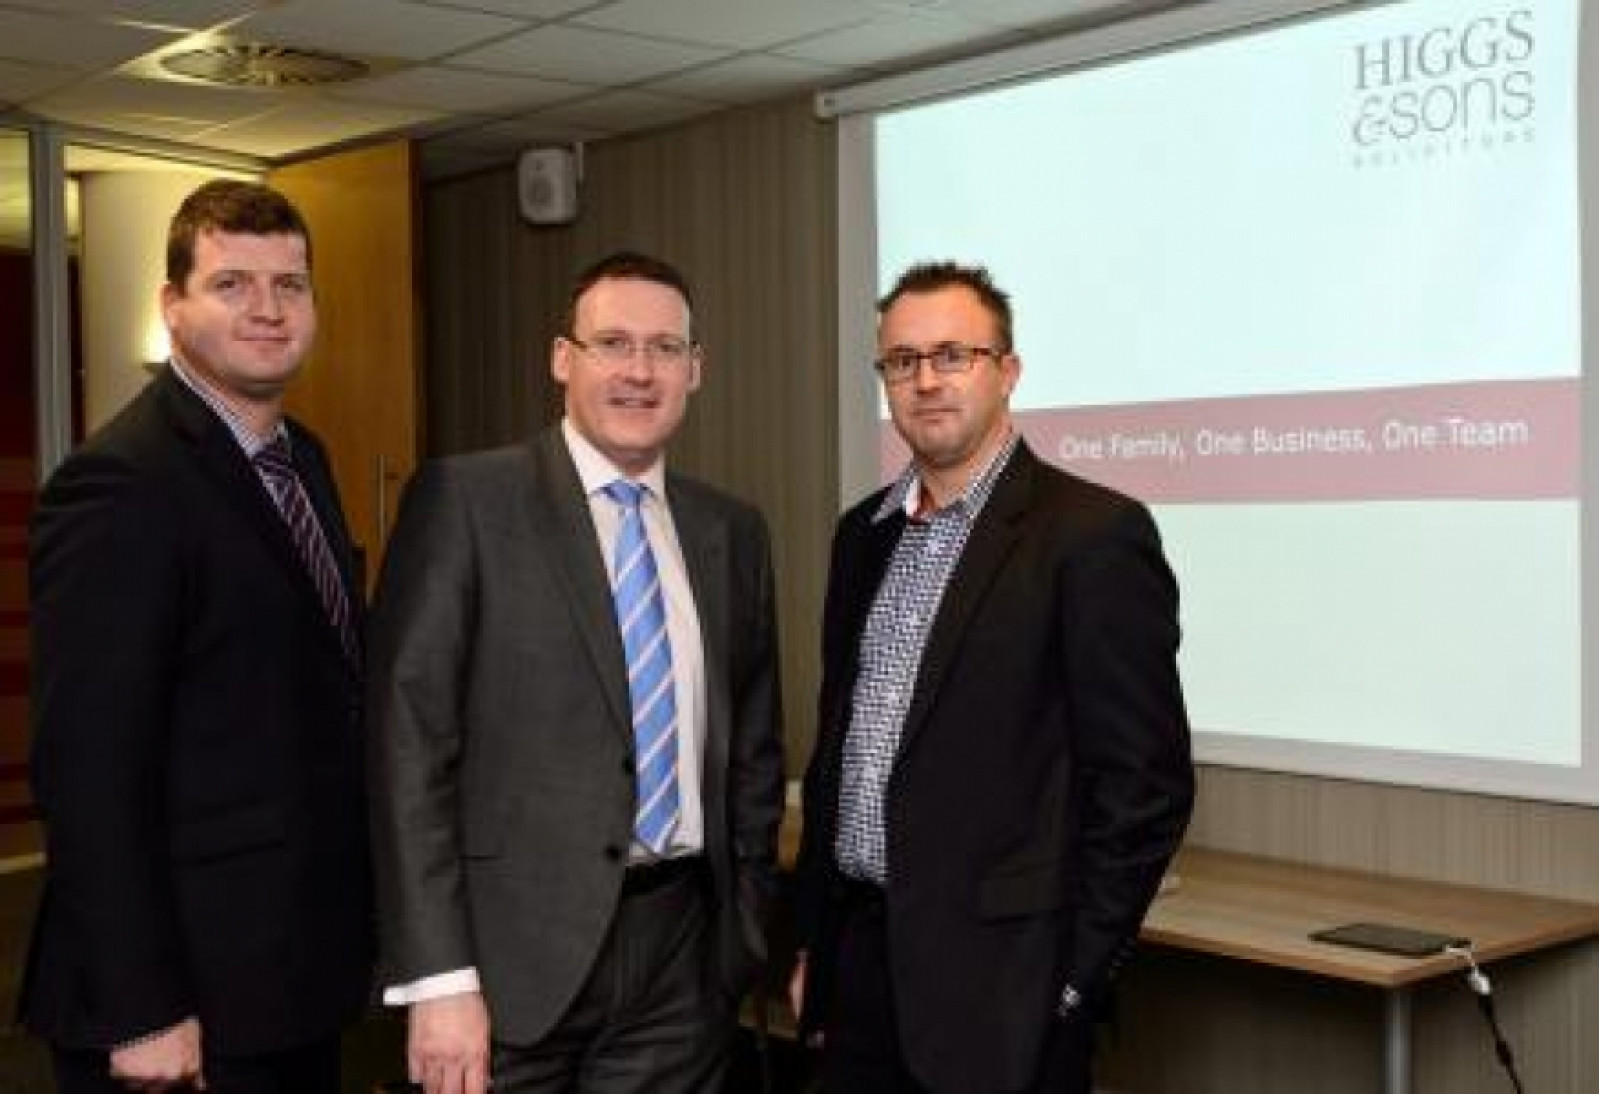 Law firms innovative seminar hailed huge success